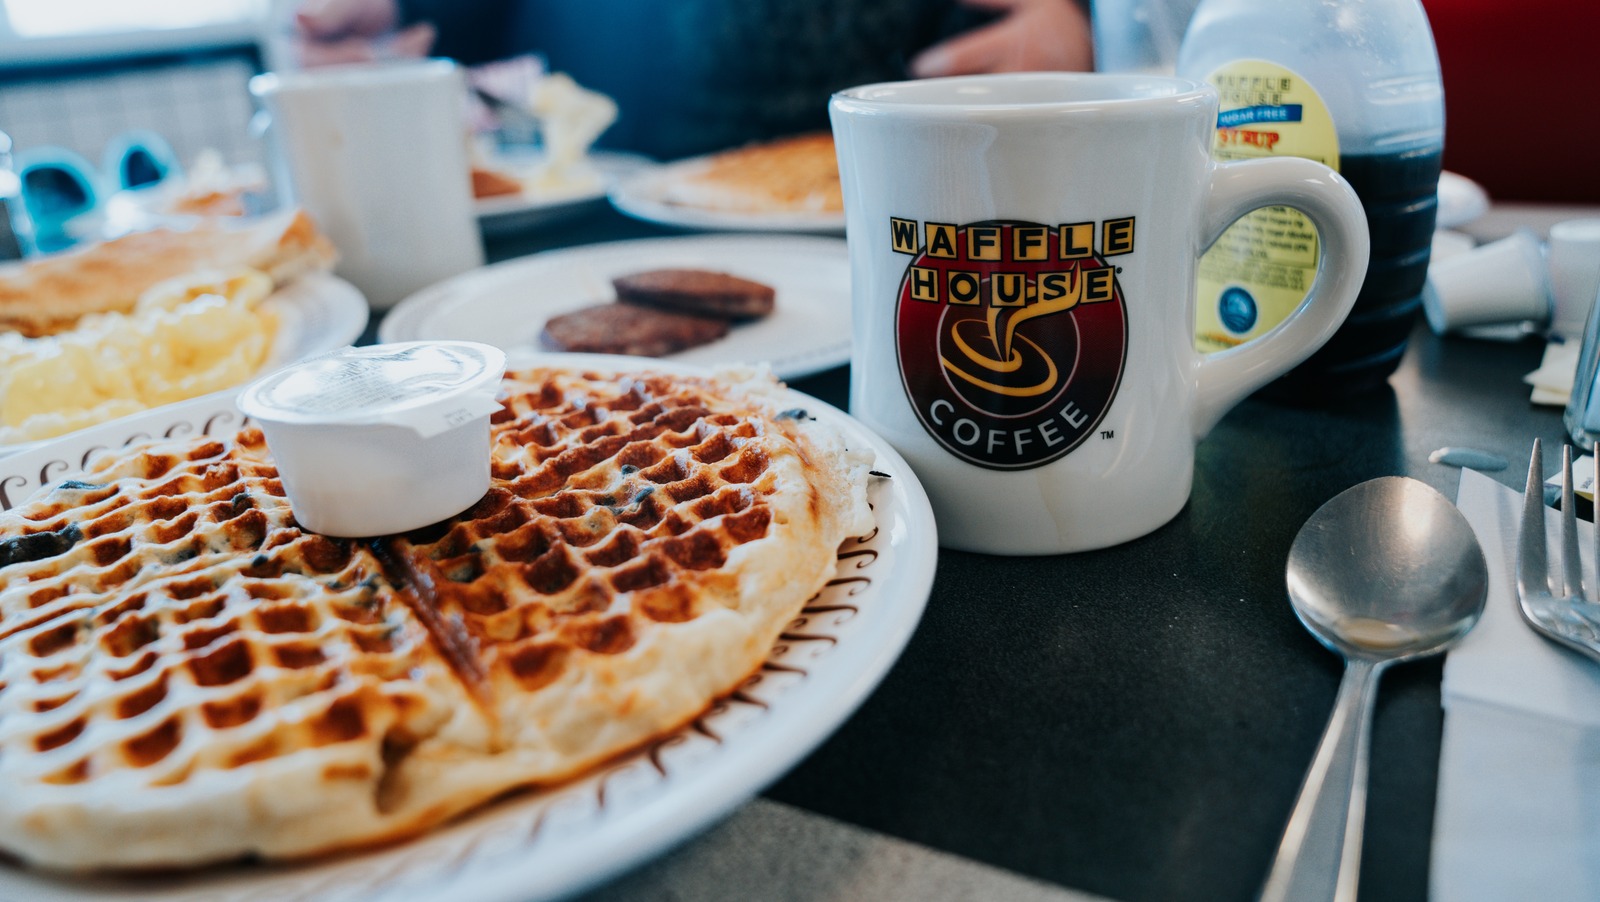 https://www.mashed.com/img/gallery/how-to-get-banned-from-waffle-house-in-one-easy-step-upgrade/l-intro-1693361093.jpg